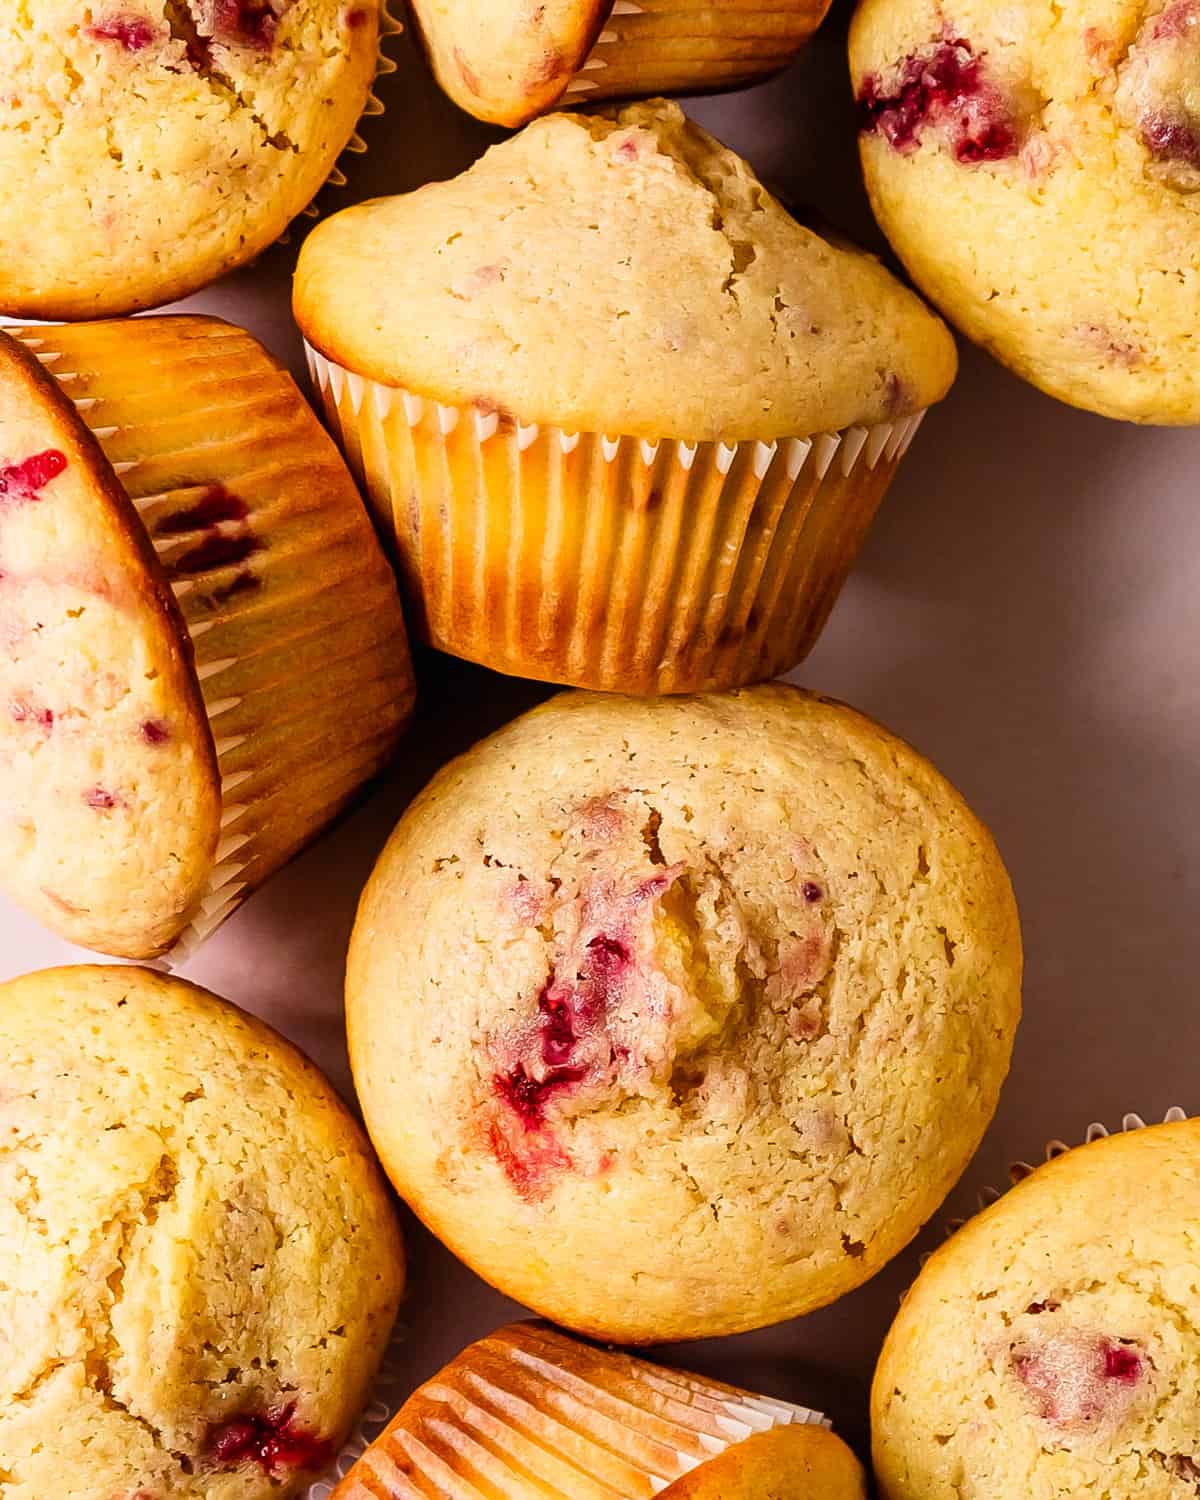 These raspberry muffins are light, fluffy and incredibly moist bakery style muffins filled with fresh or frozen raspberries and a hint of lemon.  